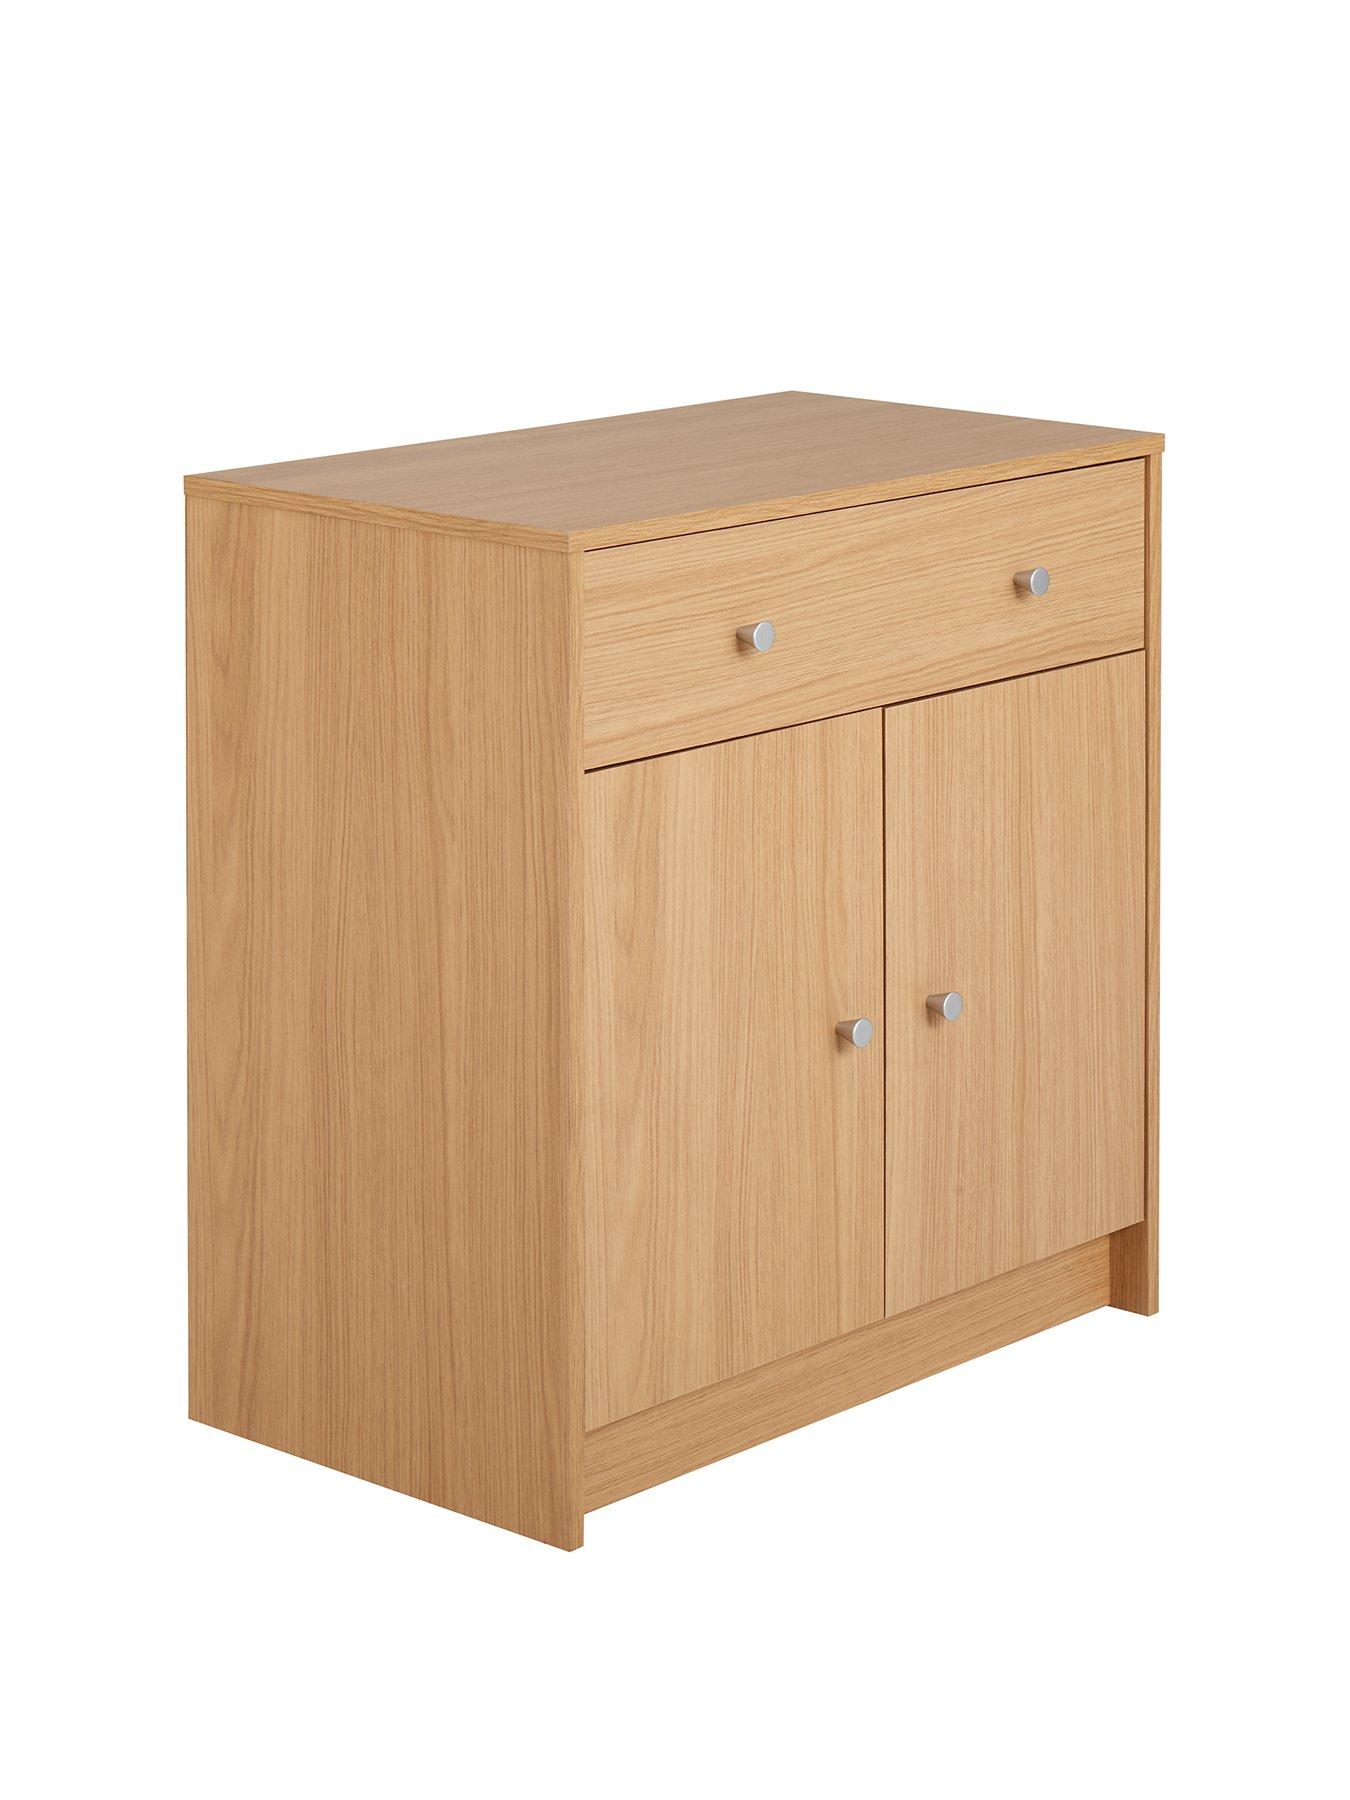 Ved navn Regan Pacific New Oslo Compact Sideboard | very.co.uk